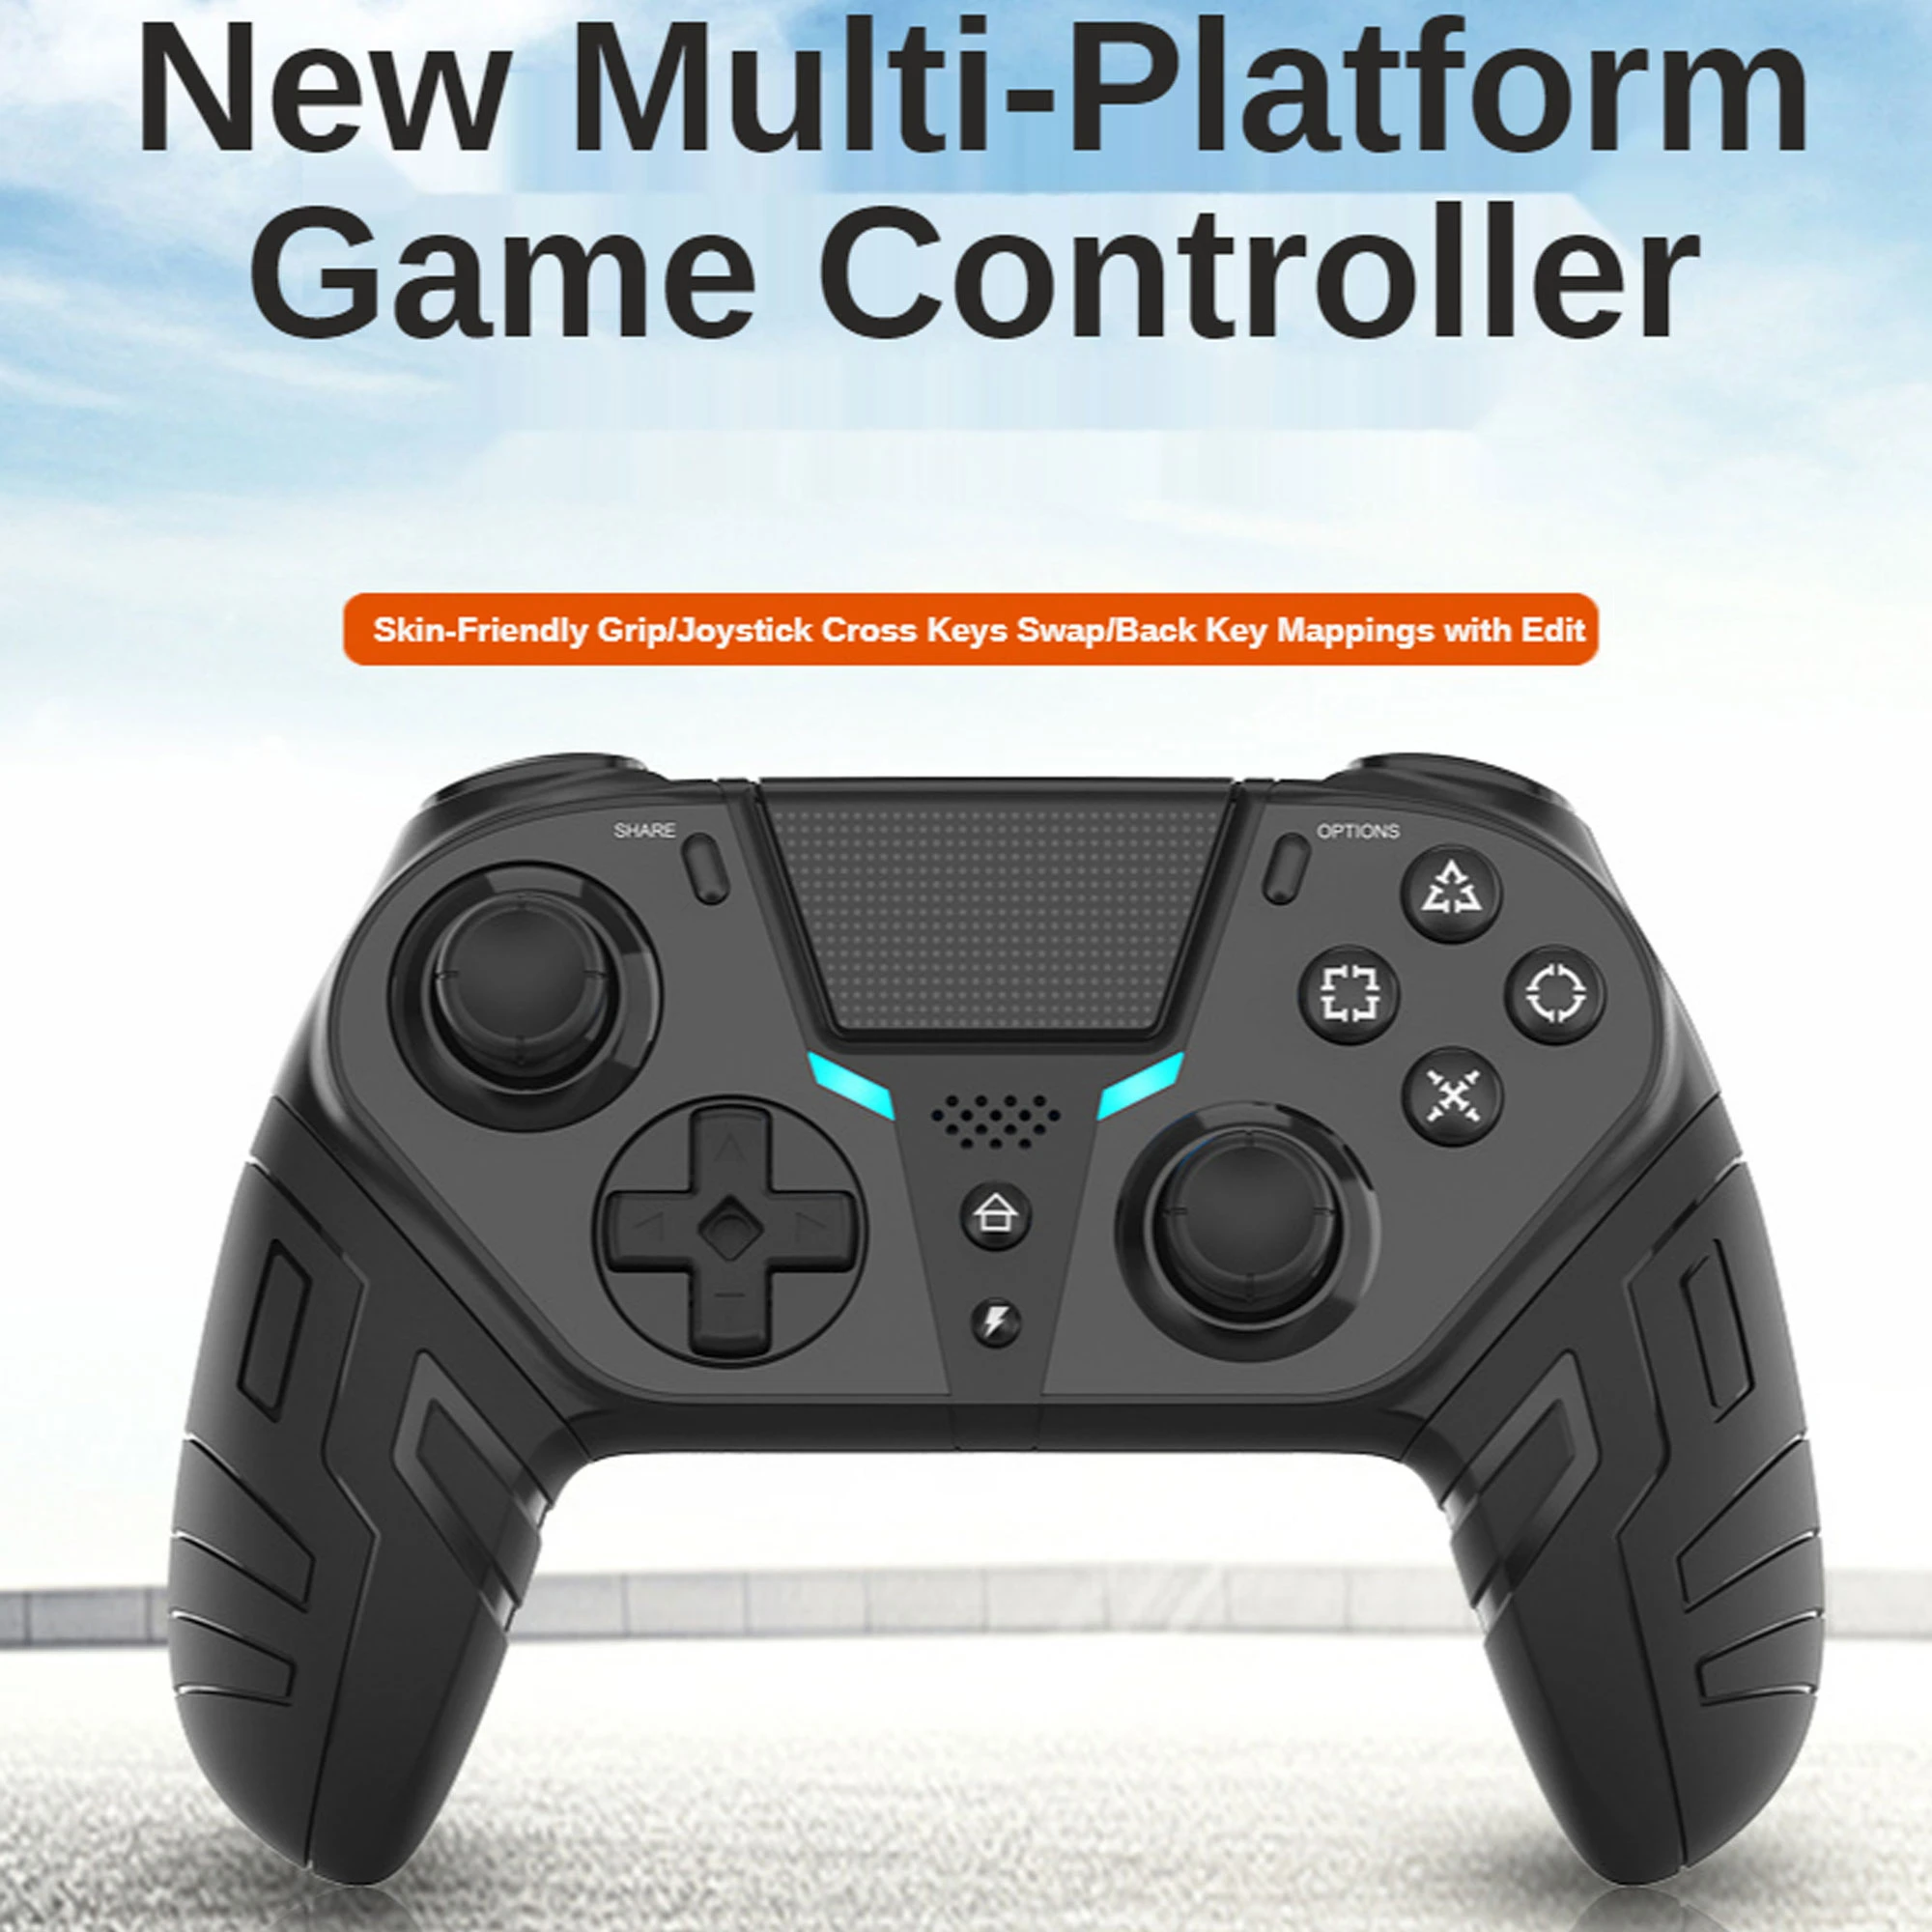 Ps4 Controller Works | Ps4 Controller Gamepad Pc | Ps4 Controller Control - Gamepads - Aliexpress